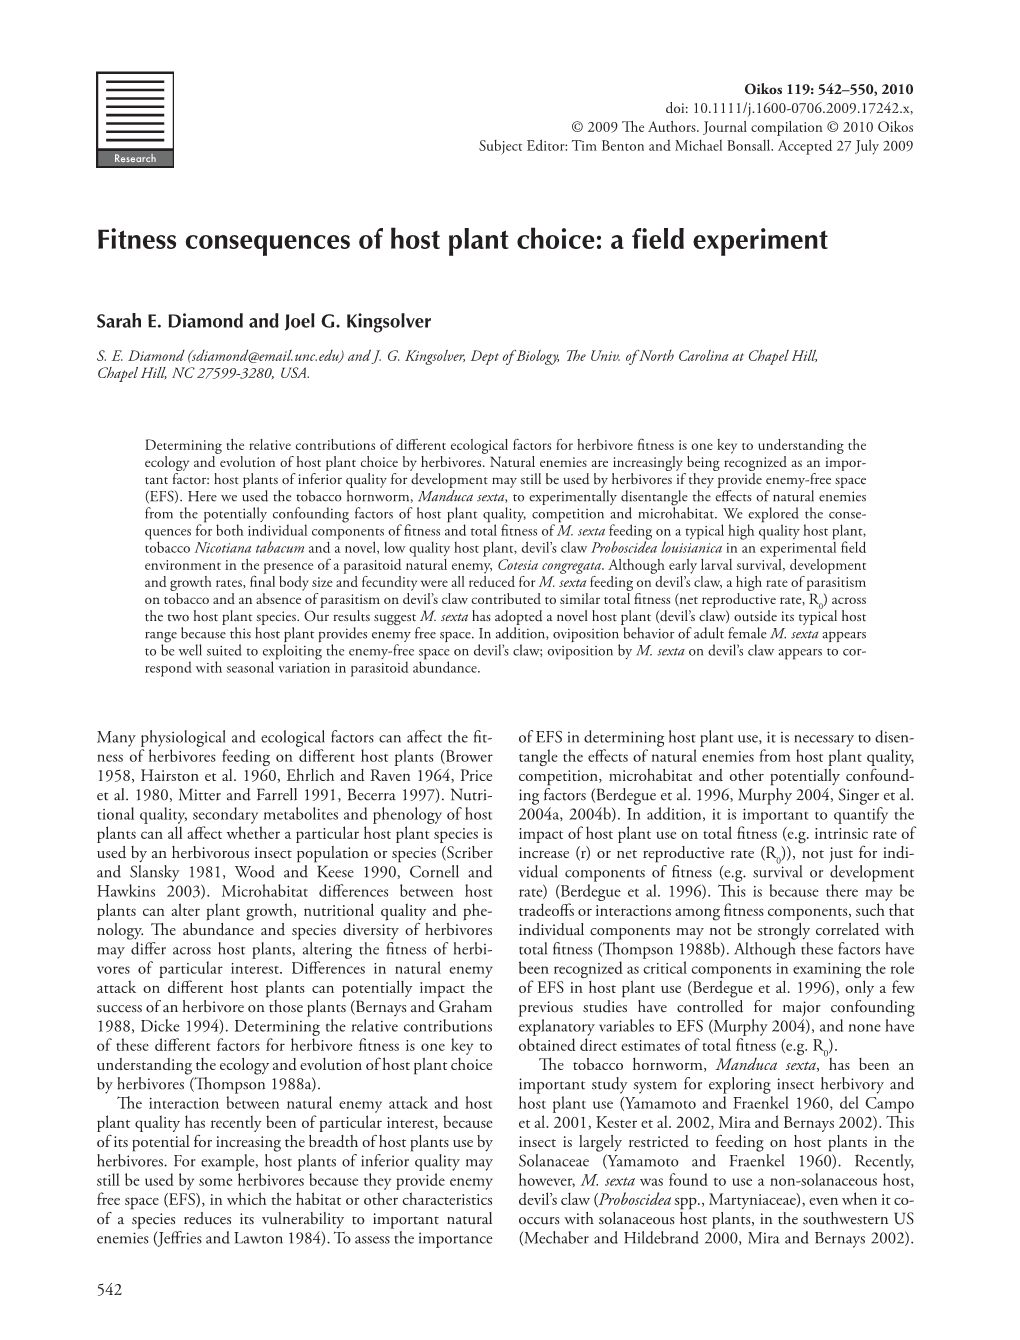 Fitness Consequences of Host Plant Choice: a Field Experiment